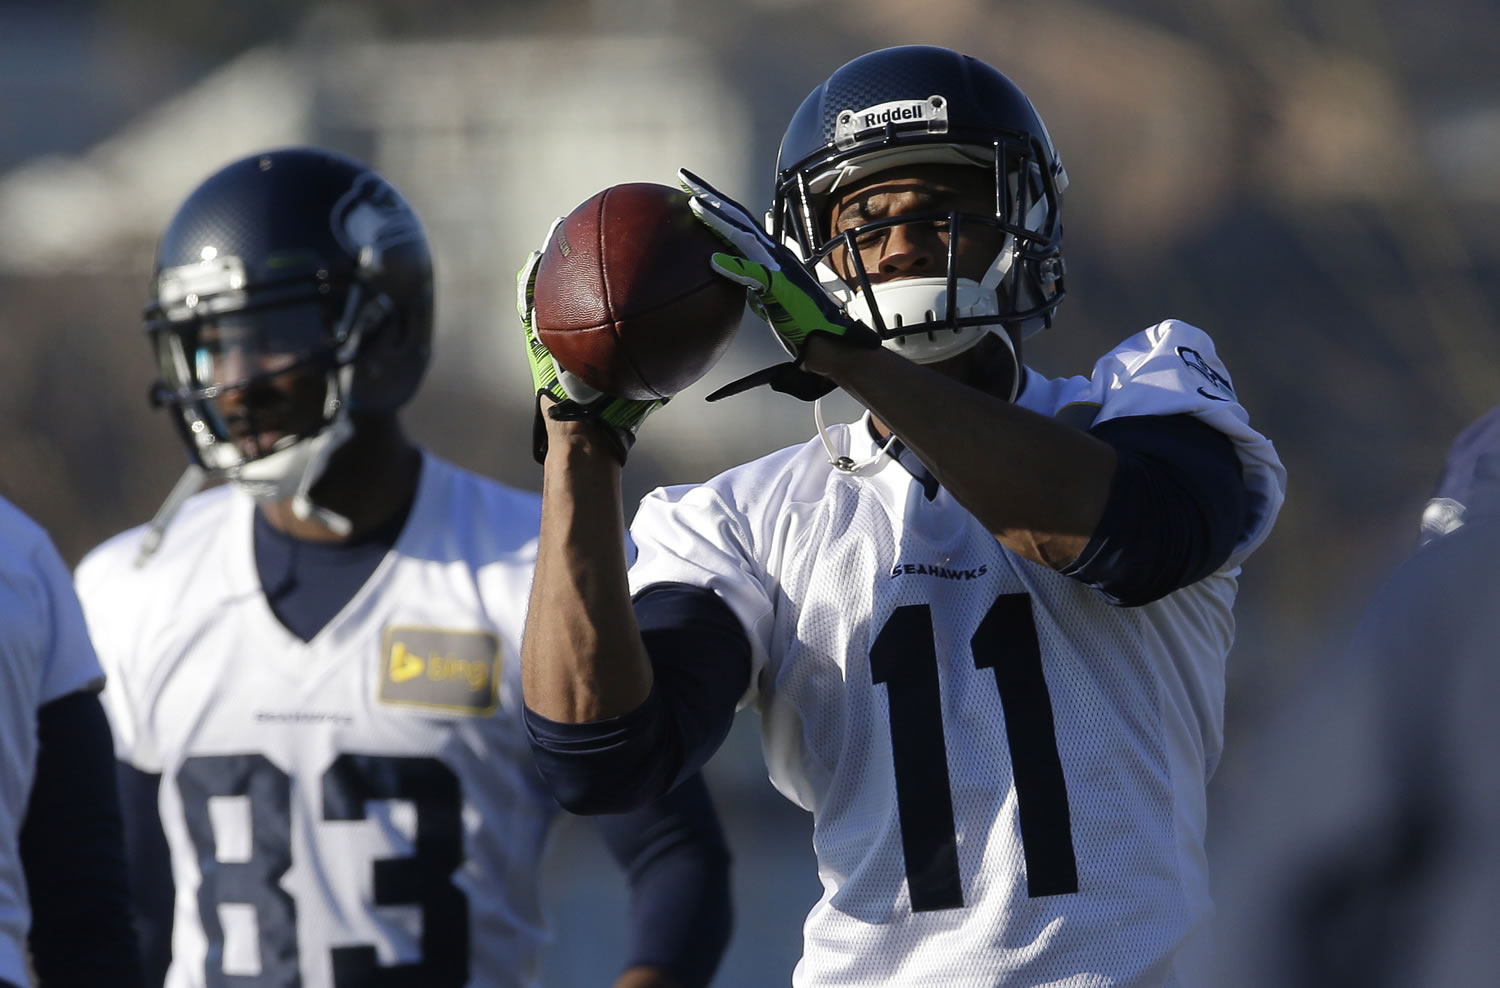 Seattle Seahawks wide receiver Percy Harvin (11) catches the football during warm-up drills before practice on Thursday in Renton. The Seahawks will play the Denver Broncos Feb. 2, 2014 in the Super Bowl. (AP Photo/Ted S.